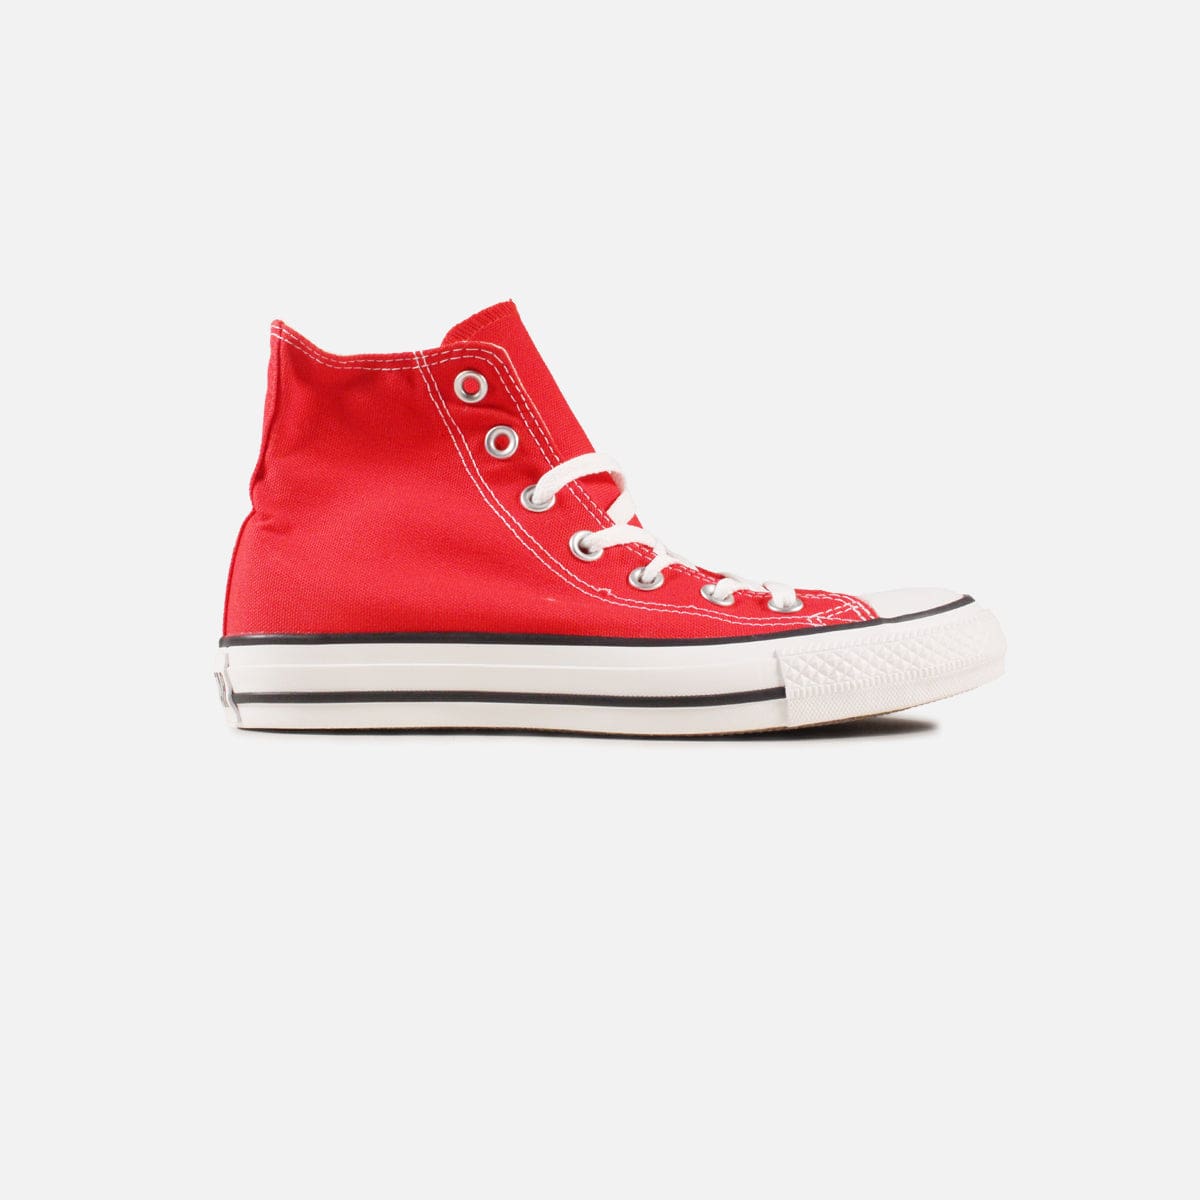 RUVilla.com is where to buy the Converse Chuck Taylor High Grade-School (Red/White)!